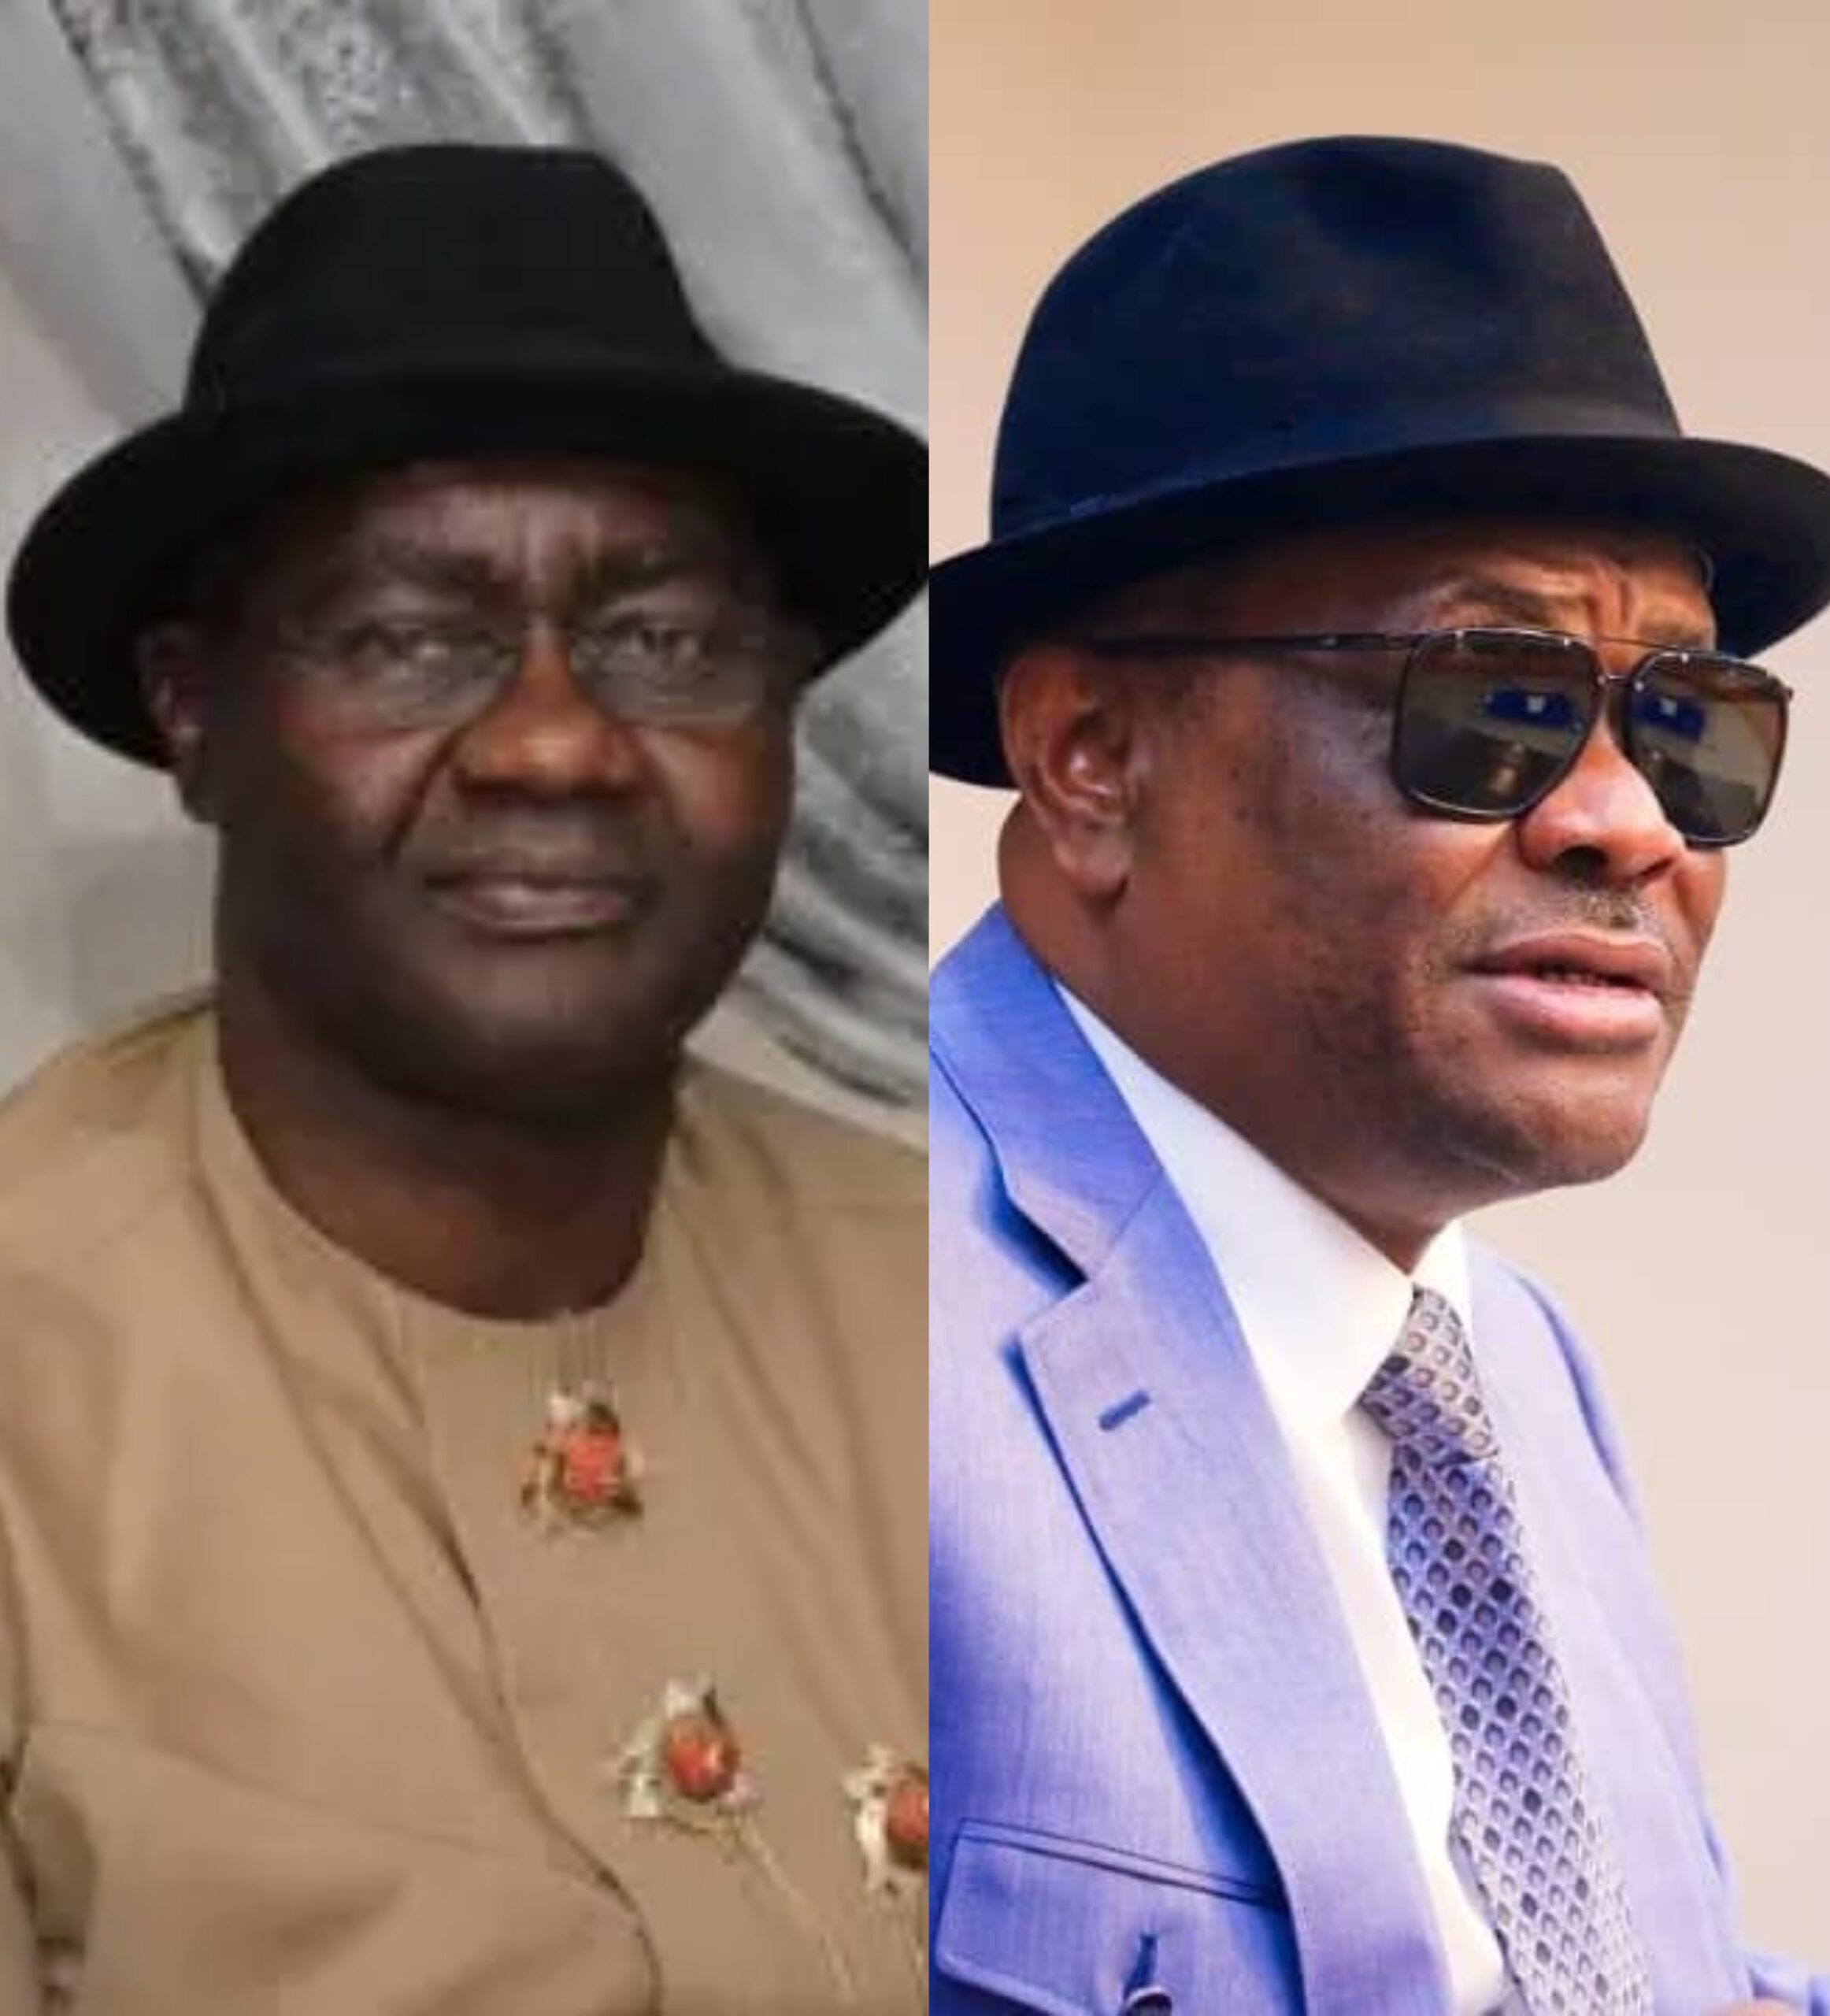 Wike Is Influential in Tinubu's Govt. Despite Not Being APC Member – Magnus Abe